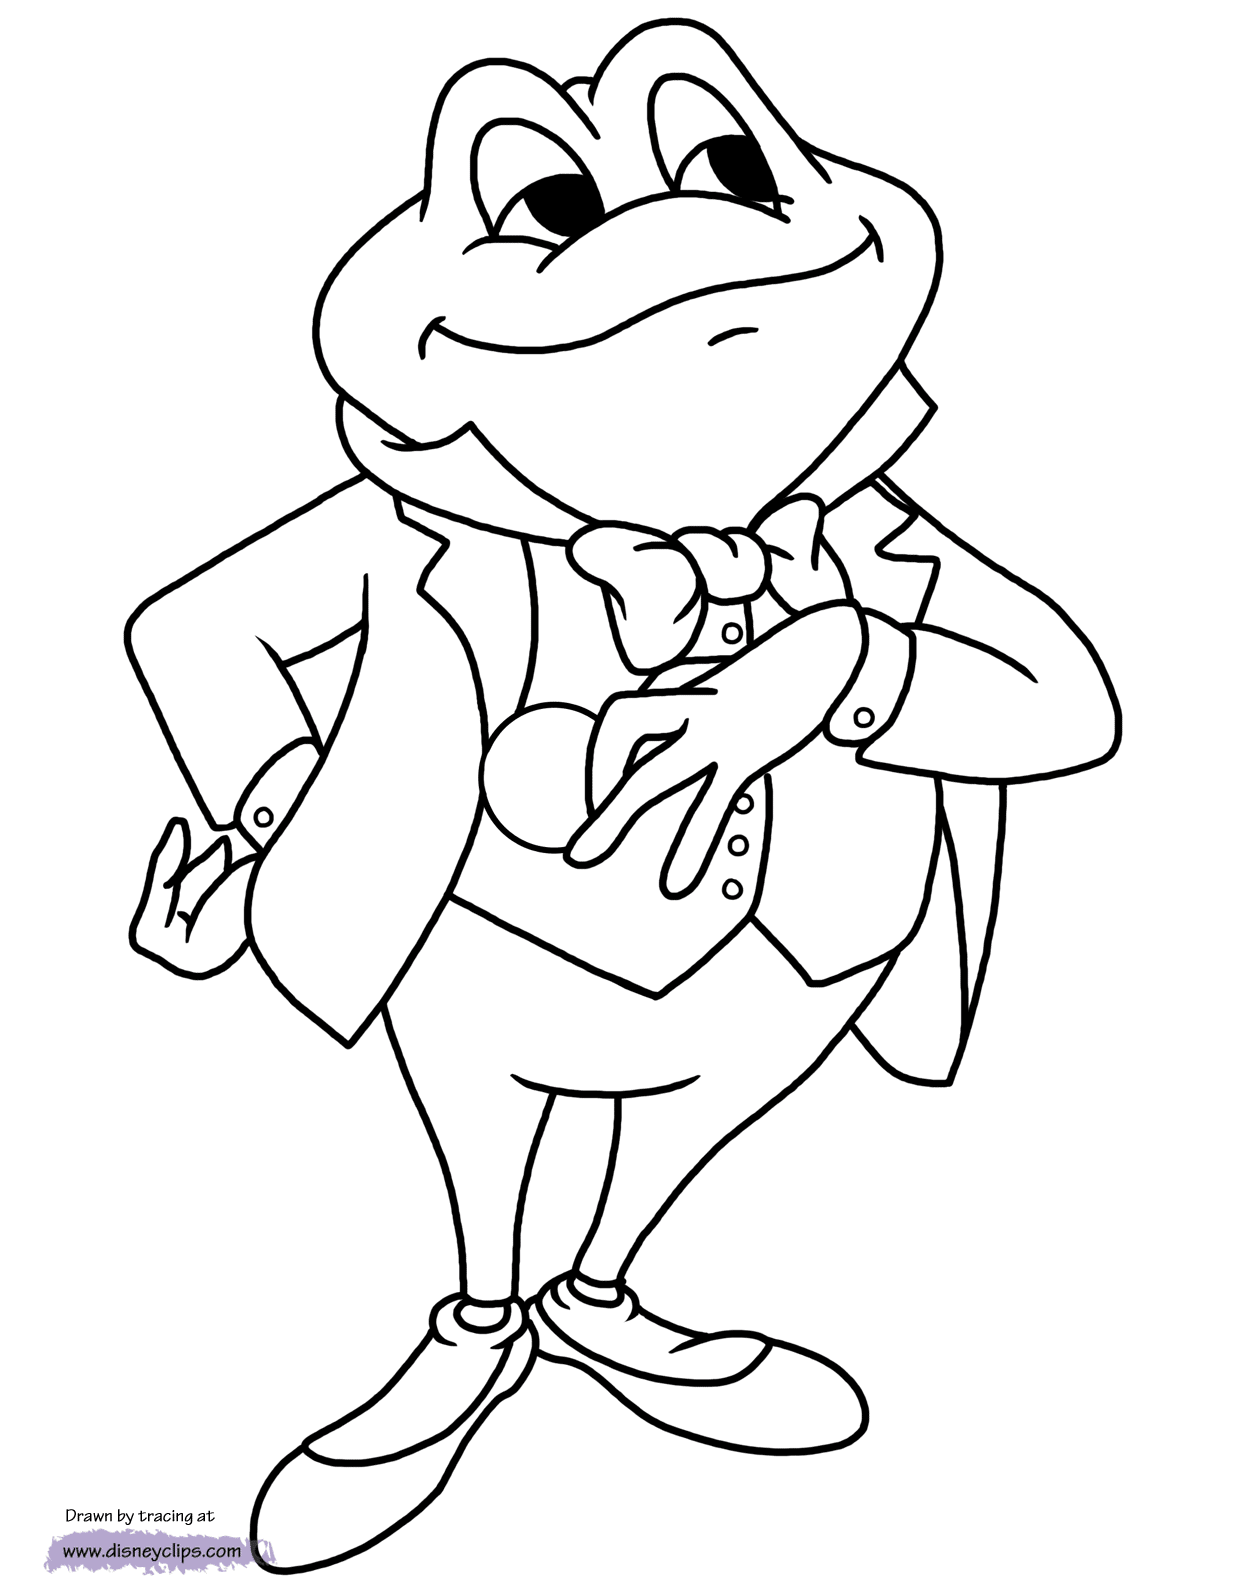 Ichabod and mr toad coloring pages